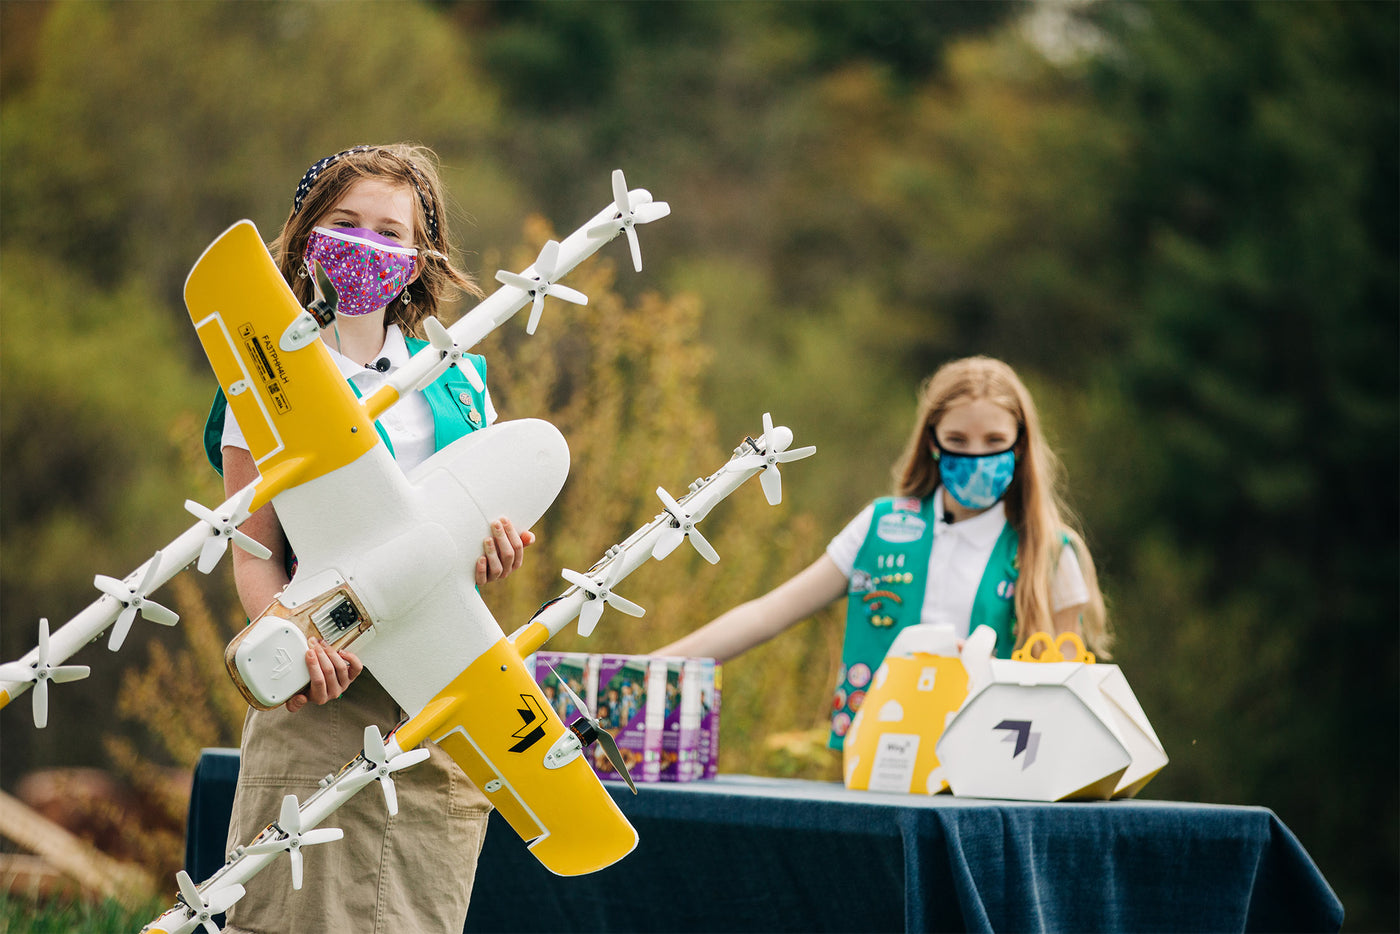 Wing’s 14-propeller, drone begun dropping boxes of Girl Scout cookies in Virginia.